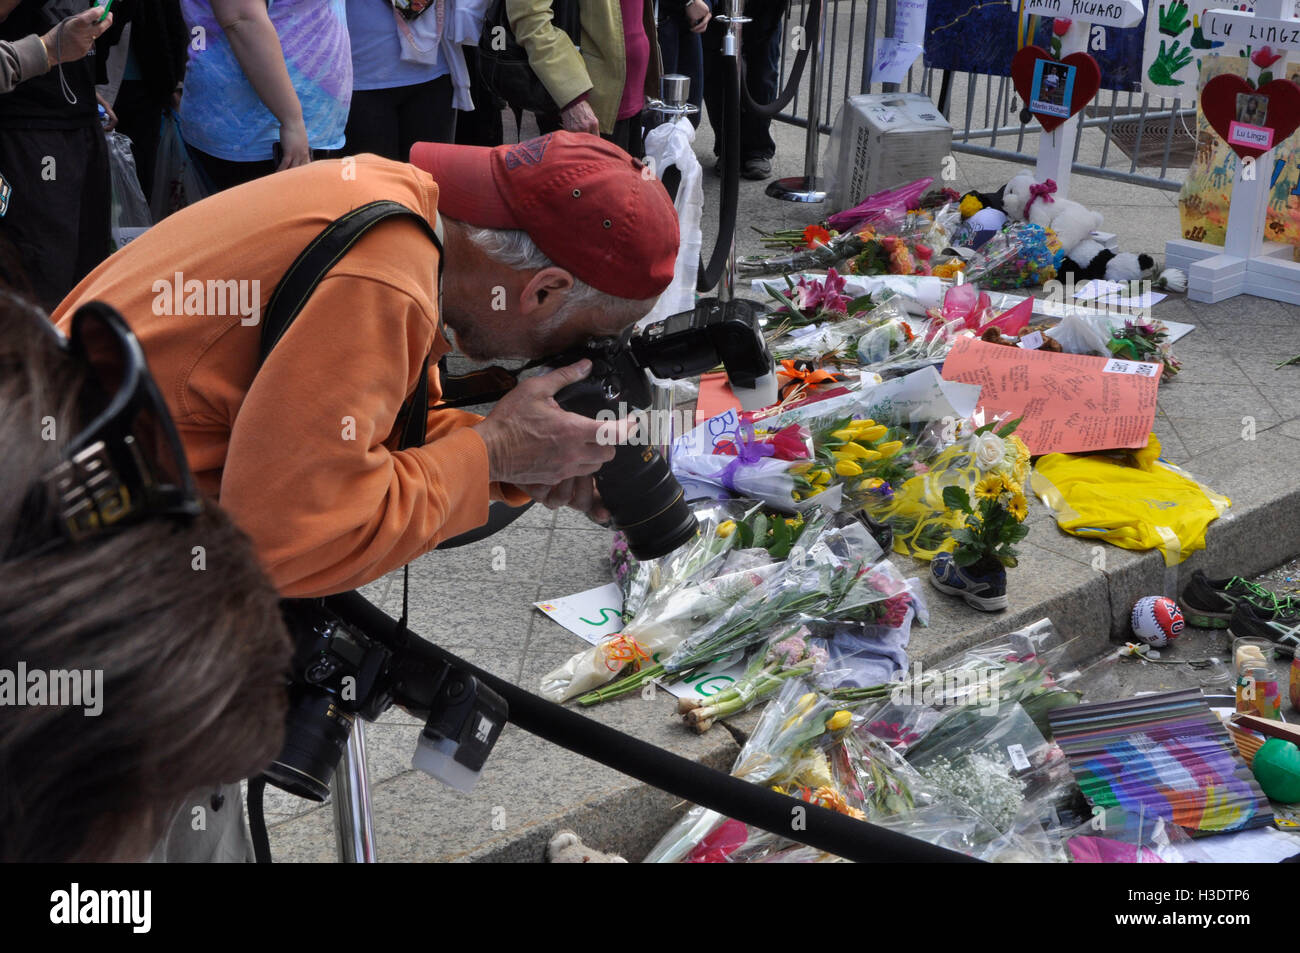 Boston, Massachusetts, USA. 18th Apr, 2013. A photographer shoots items left by people as a memorial to the fallen of the double bombing on Boylston St., during the running of the Boston Marathon on Patriots Day. © Kenneth Martin/ZUMA Wire/Alamy Live News Stock Photo